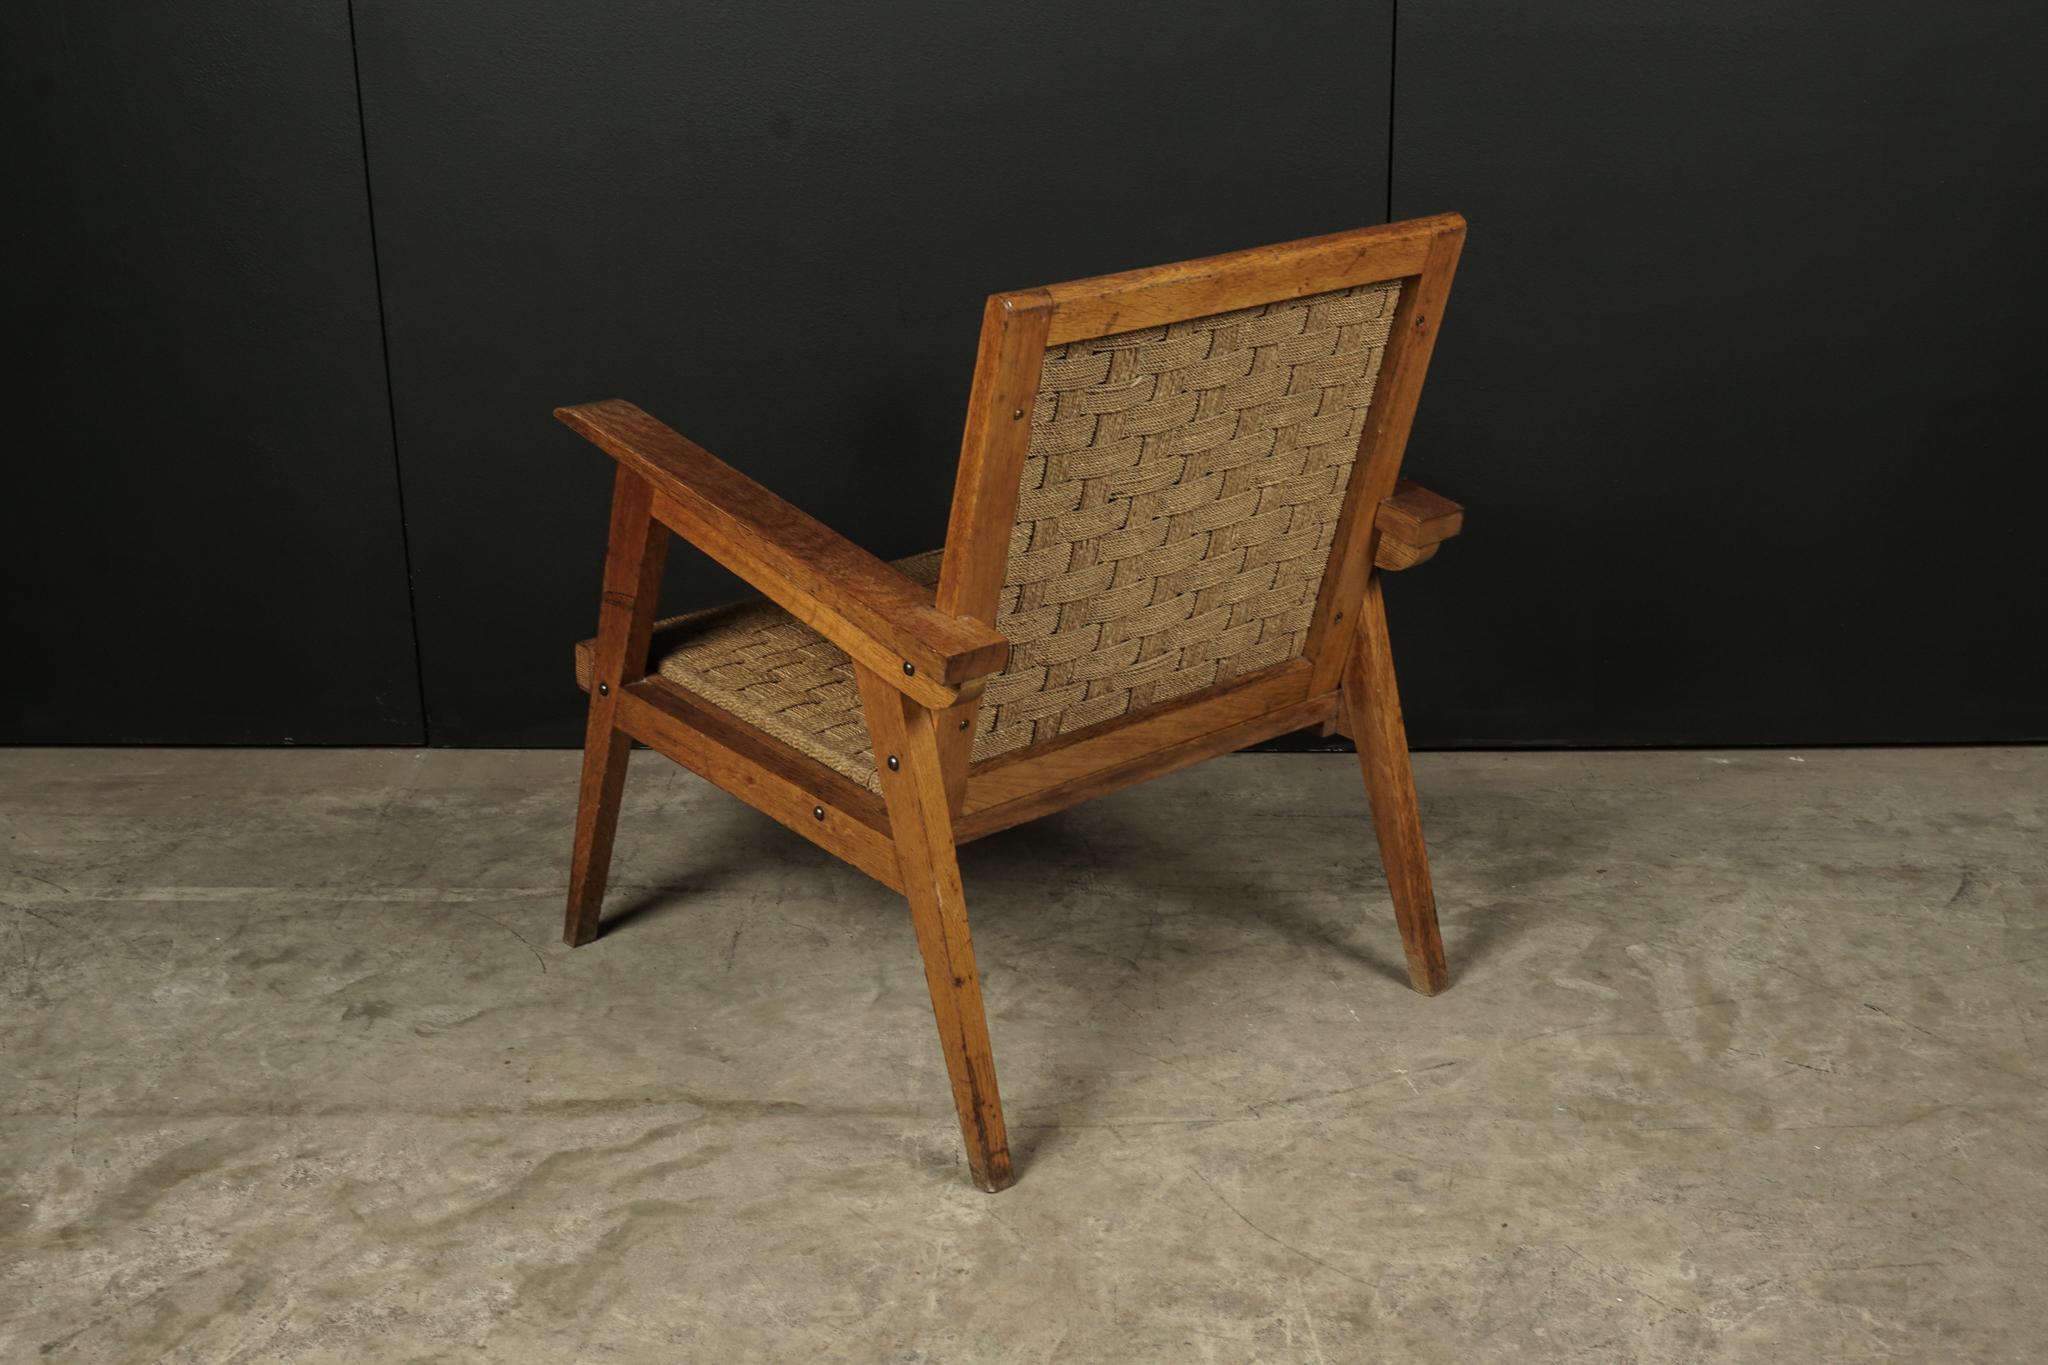 Midcentury Chair from France, circa, 1970 (Ende des 20. Jahrhunderts)